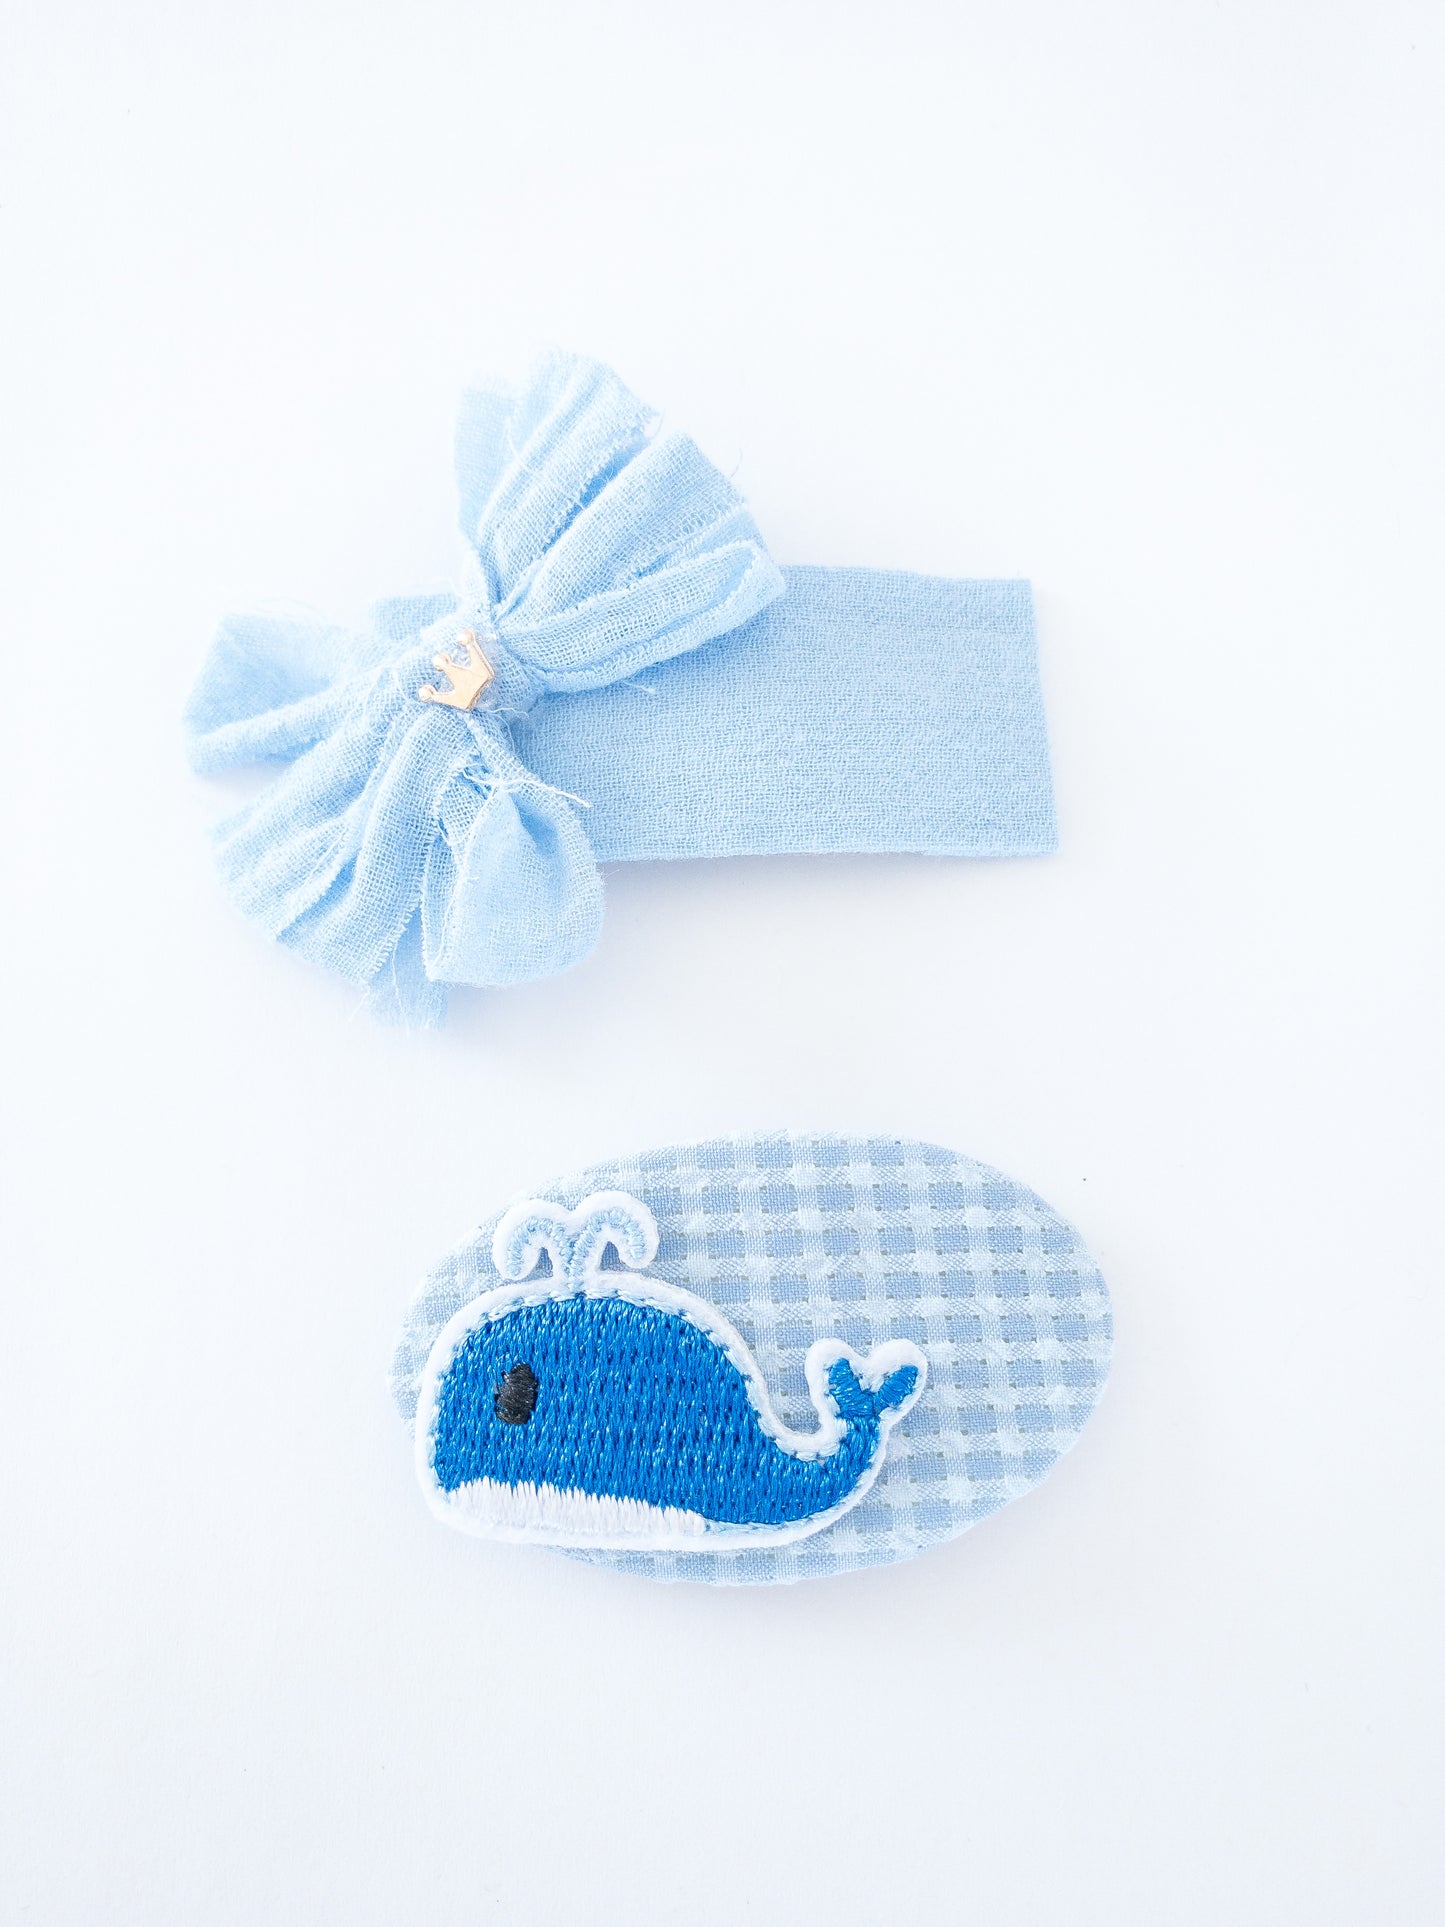 The cutest little blue whale is affixed to a soft blue gingham pattern fabric all wrapped around an oval barrette. The rectangle barrette is wrapped in a solid blue fabric with a fabric bow and a tiny gold crown attached. Both are snap clips, so easy to snap into your hair!